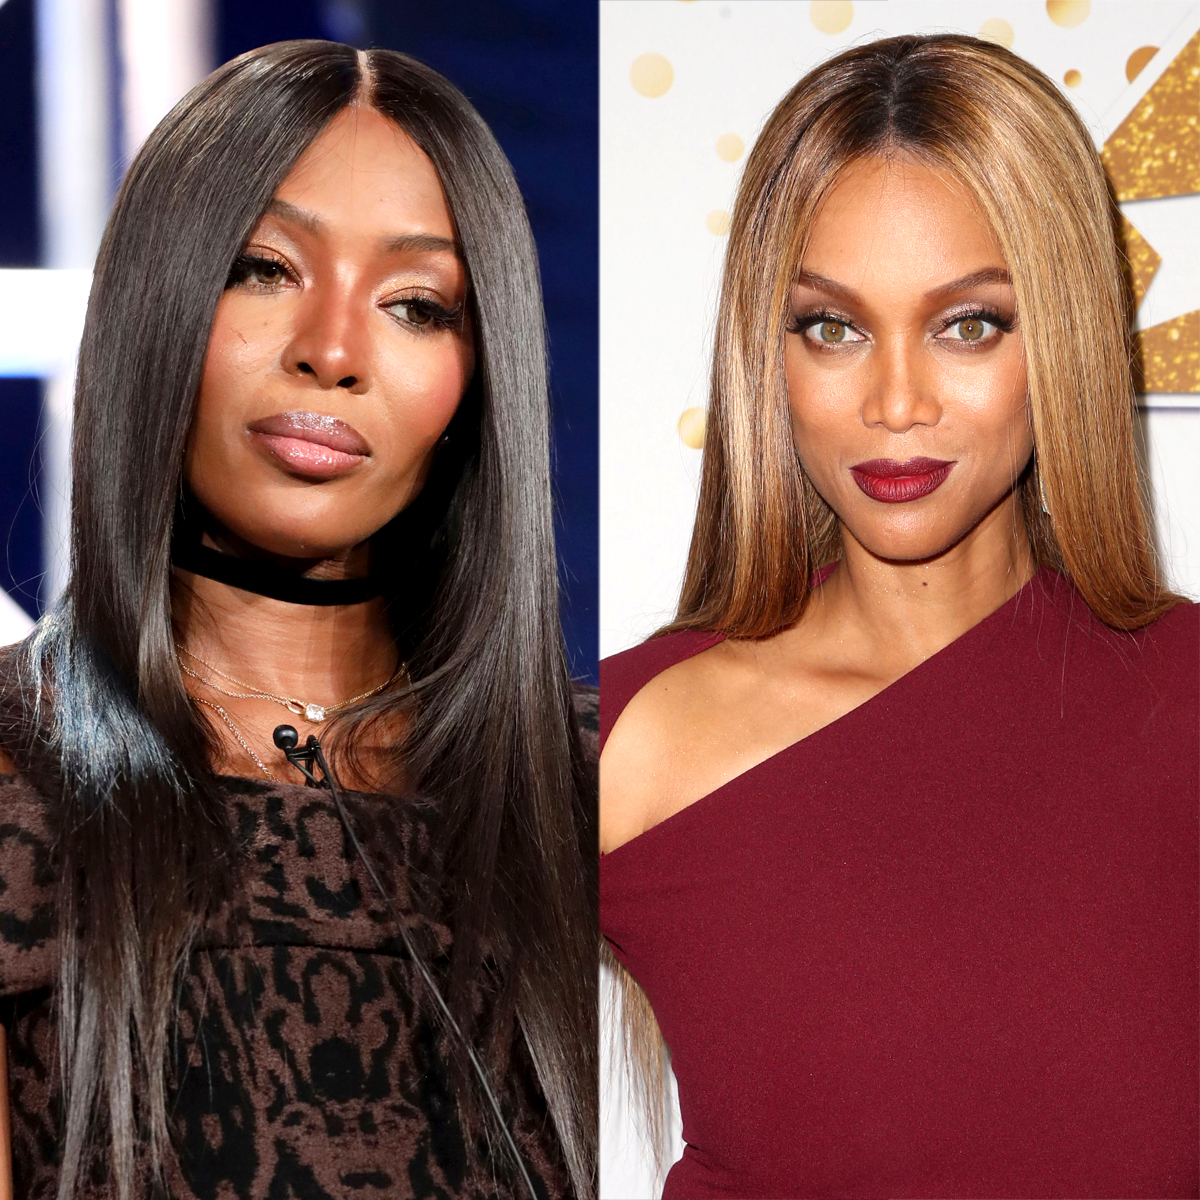 Naomi Campbell's Latest Hints Tyra Banks Is Real Mean Girl" E! Online